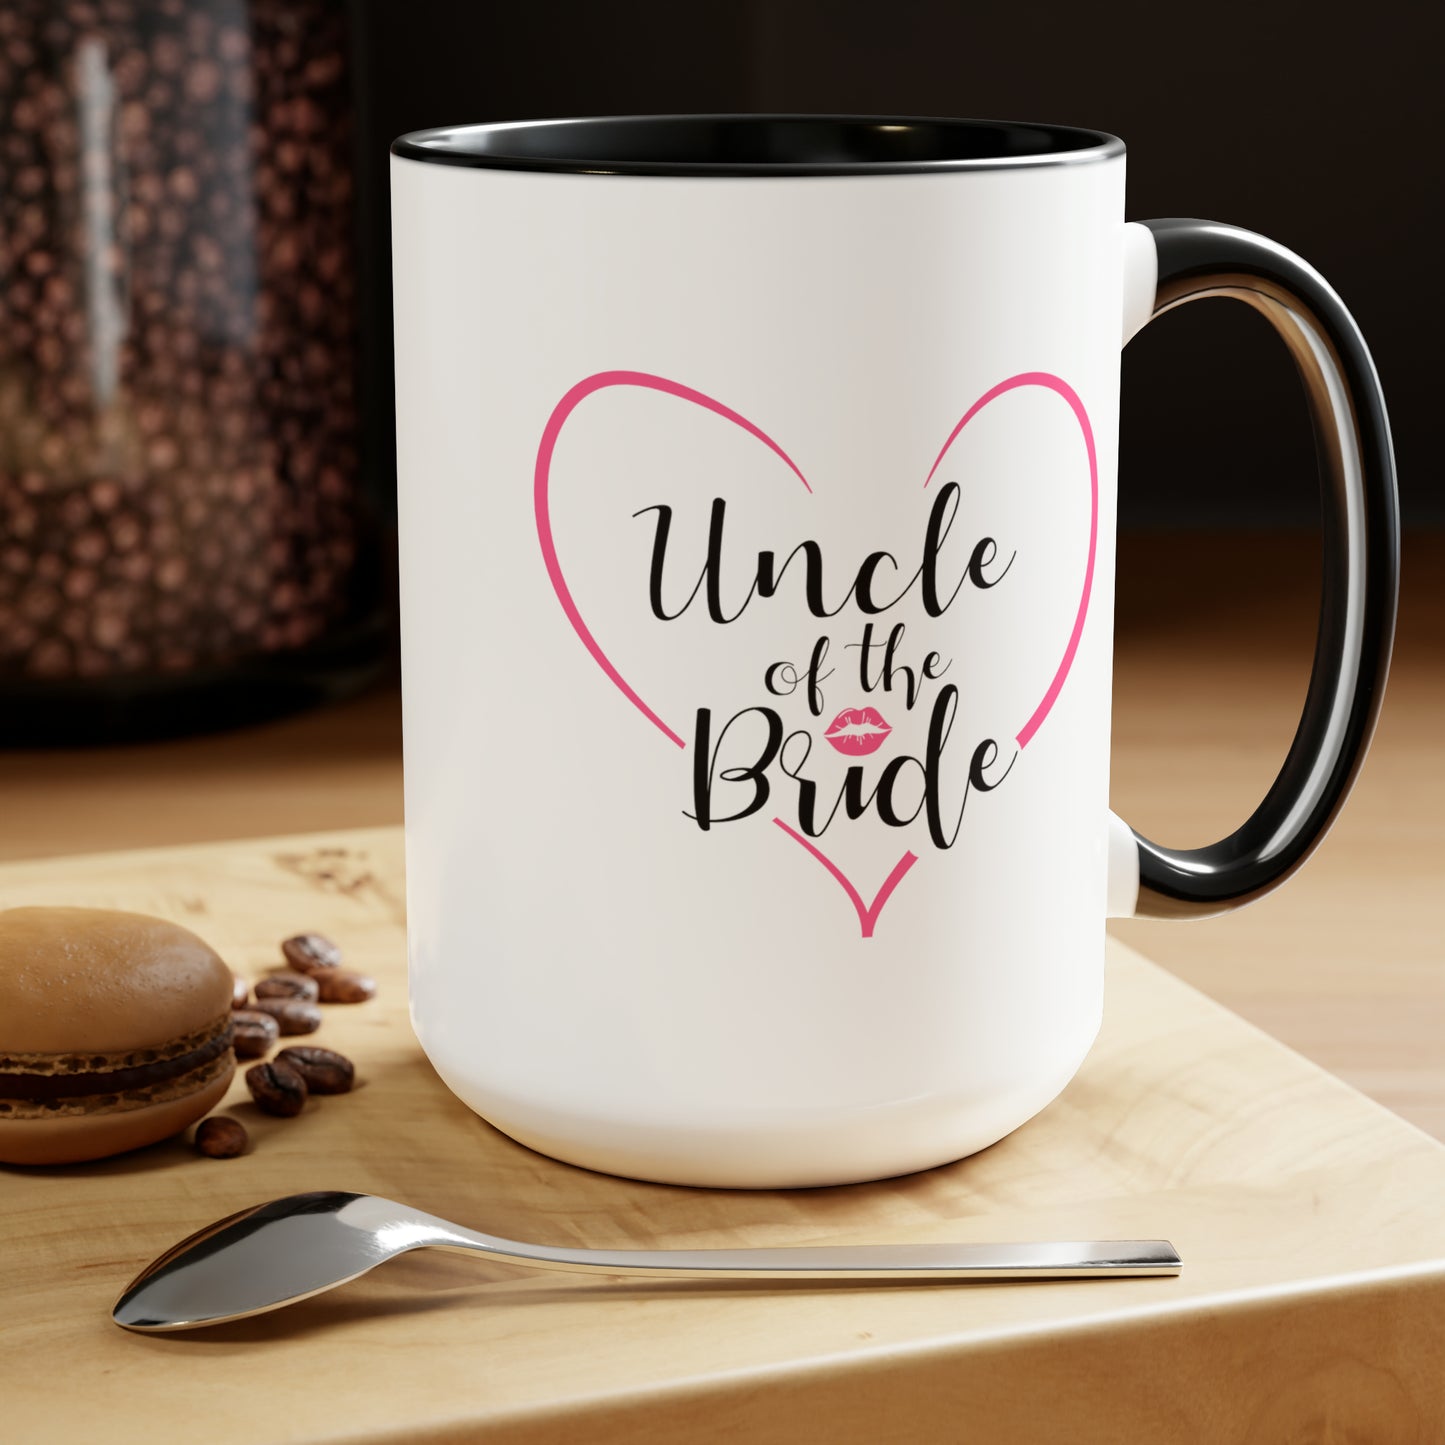 Uncle of the Bride Coffee Mug - Double Sided Black Accent Ceramic 15oz by TheGlassyLass.com